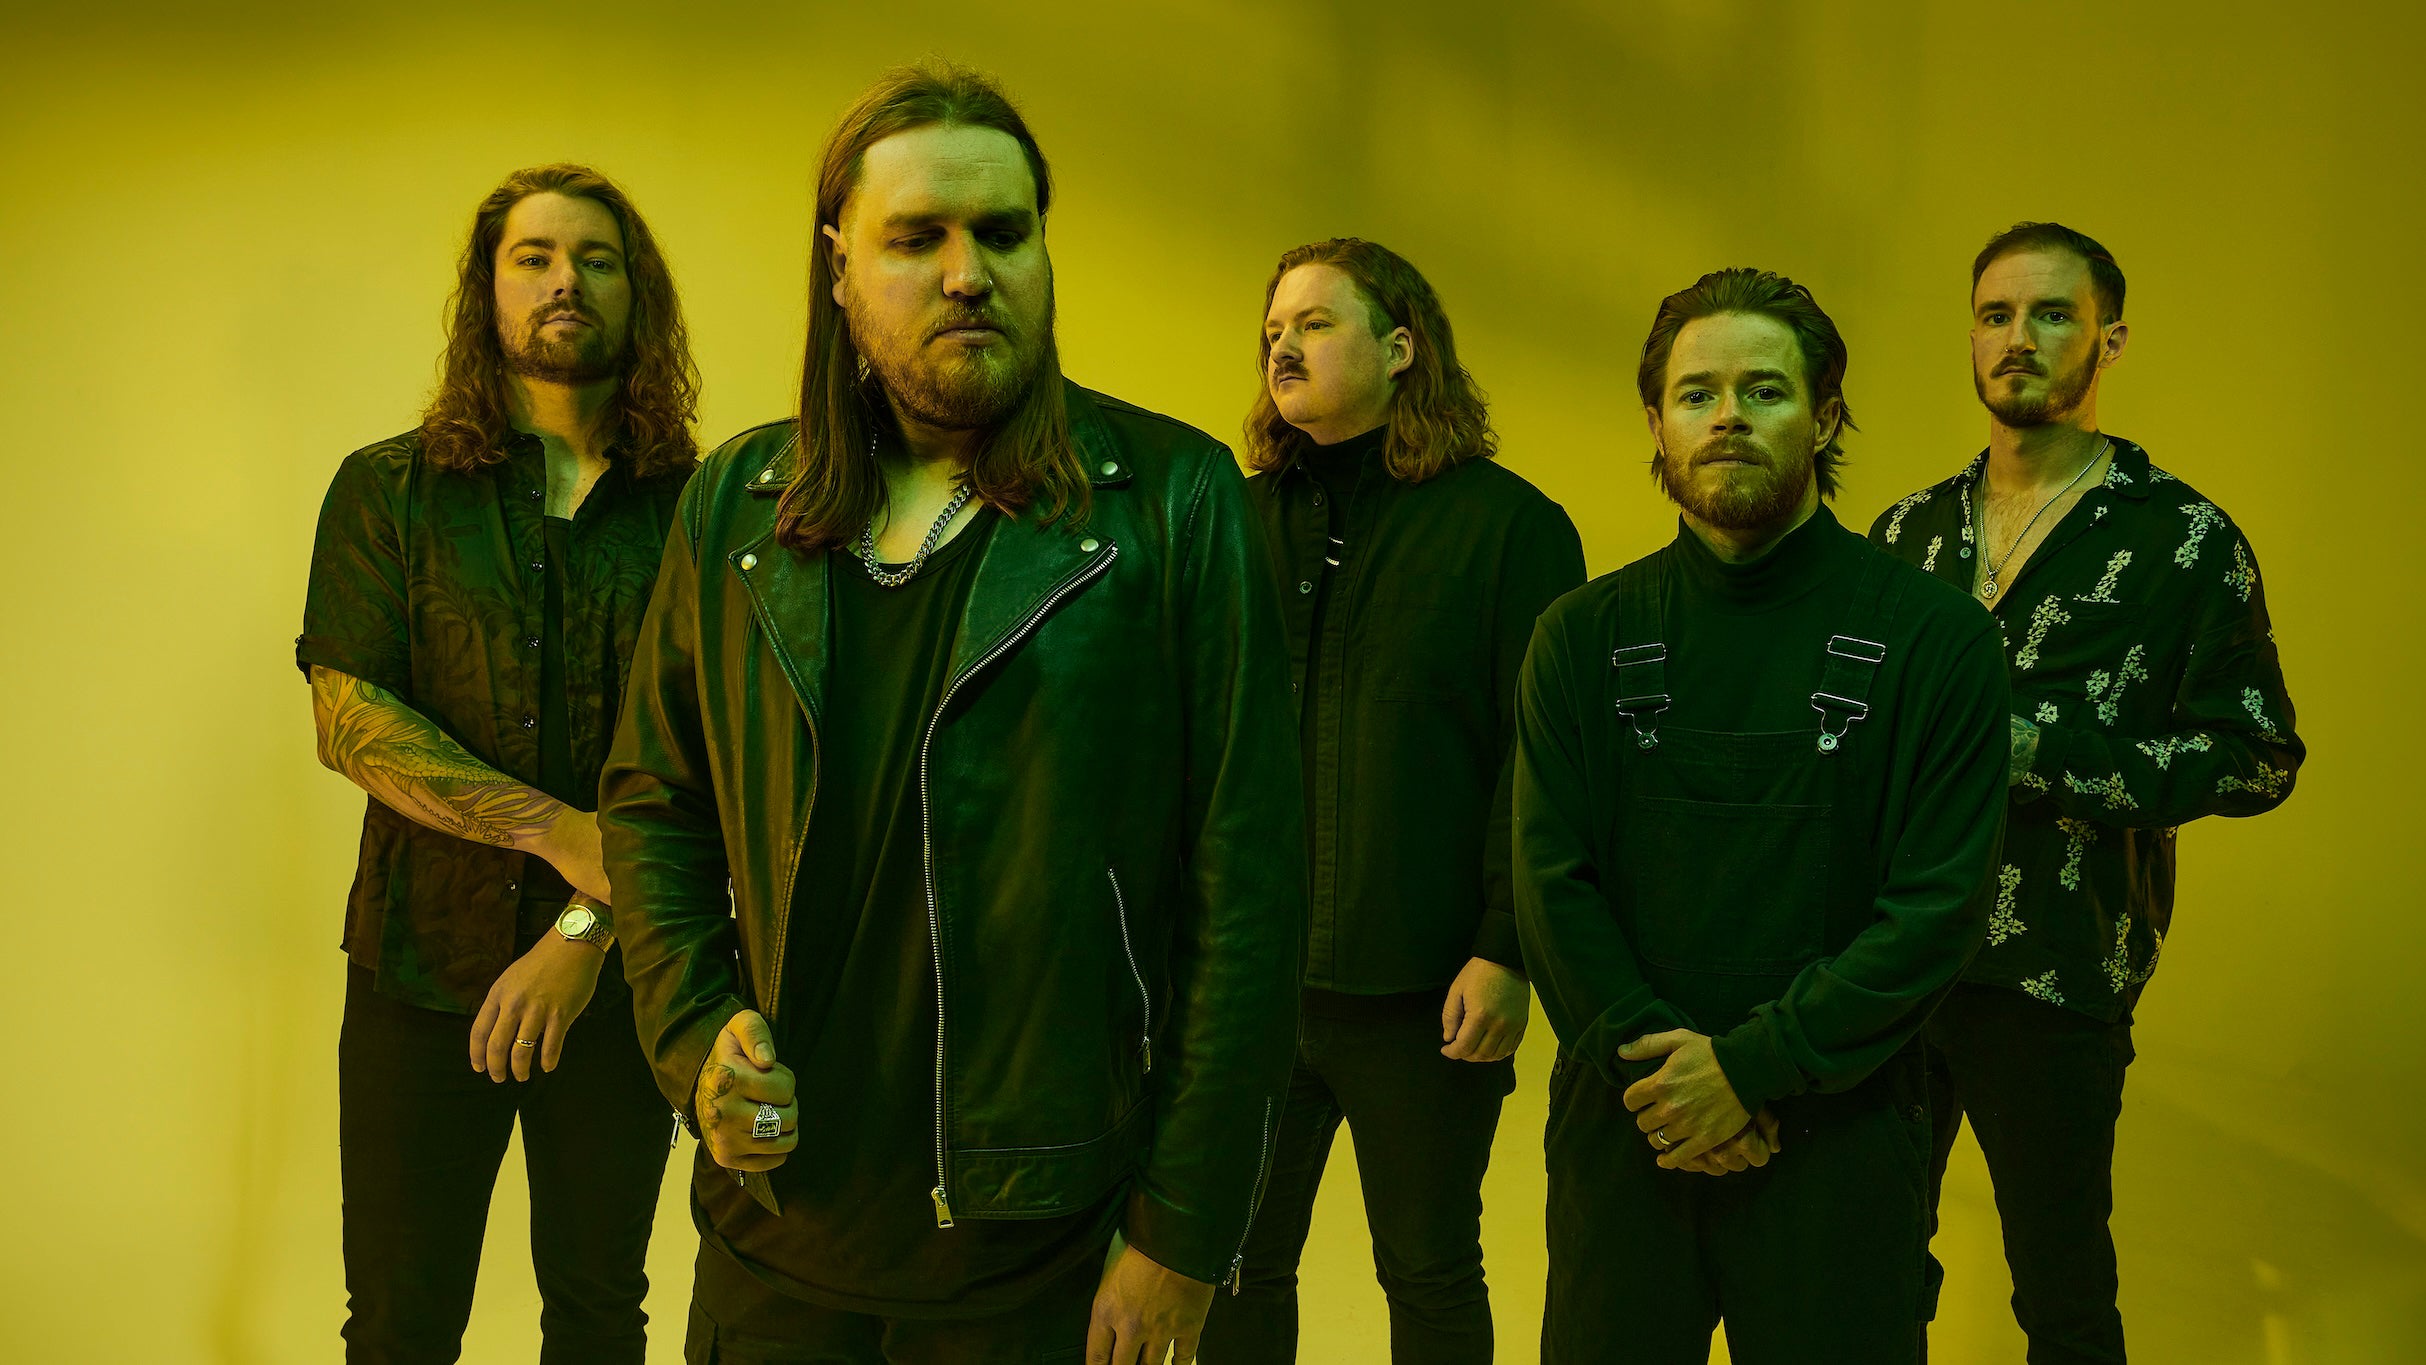 Wage War & Nothing More at The Ritz